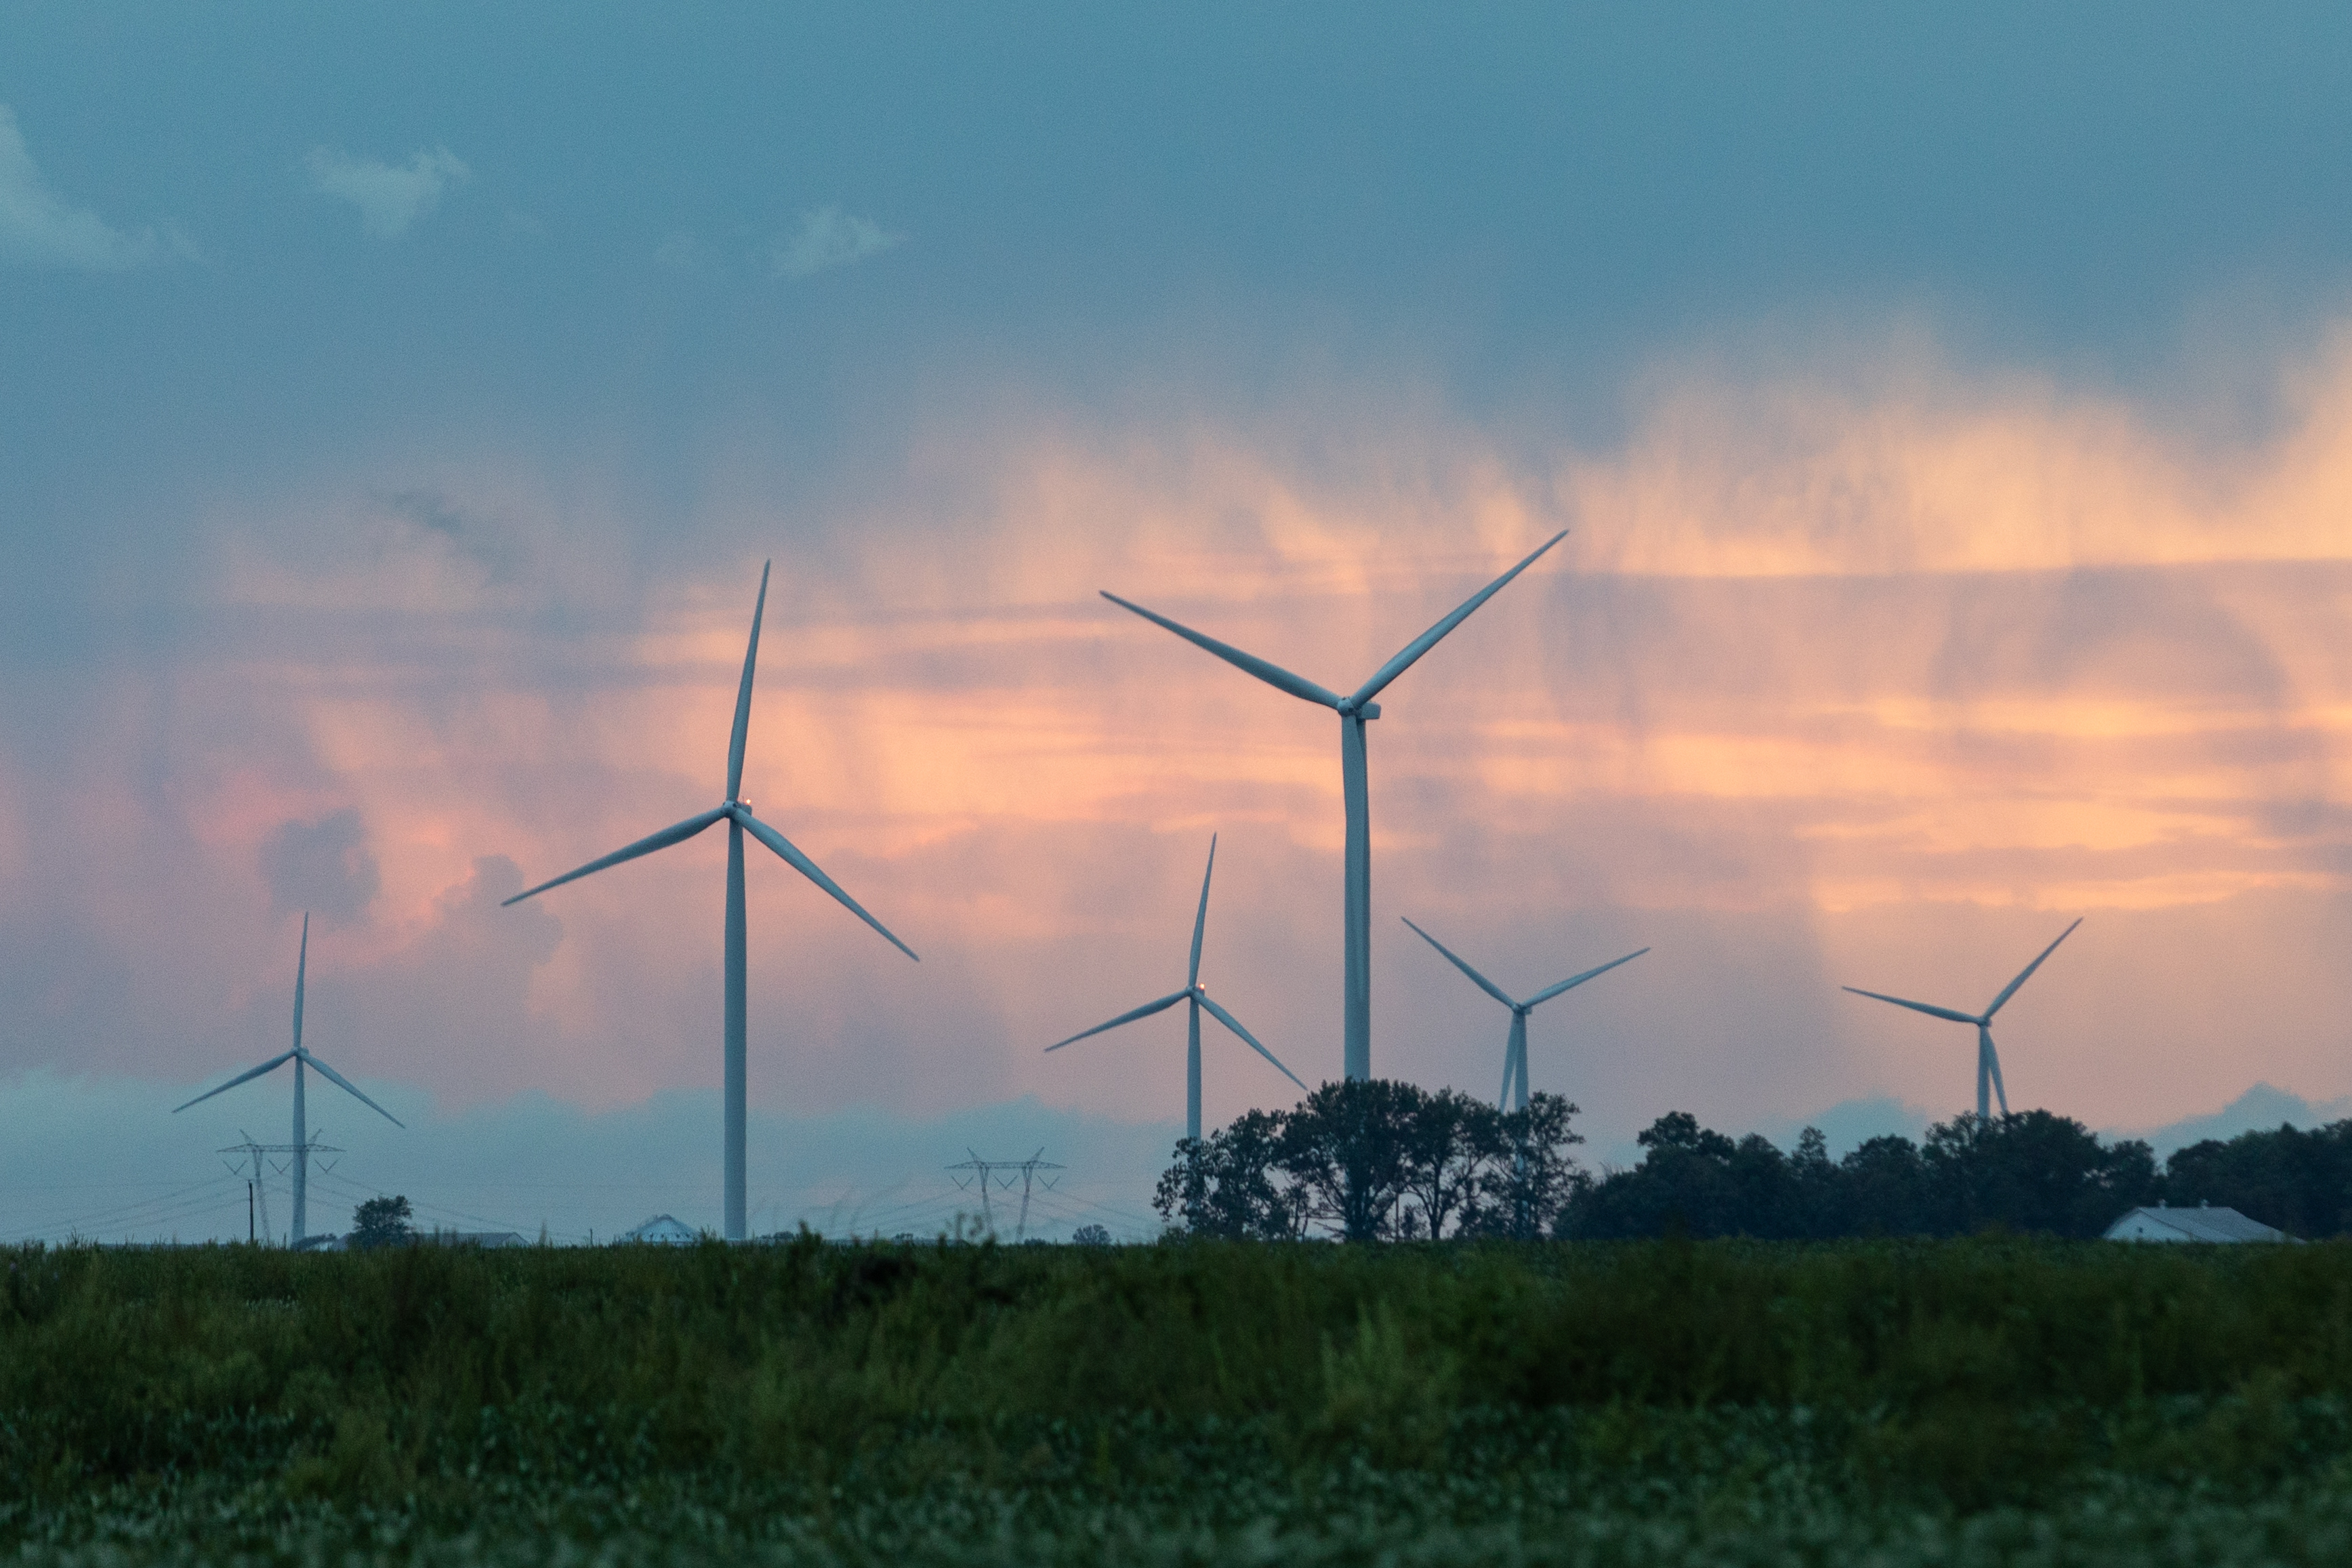 Windmills scattered across a Midwest landscape at sunset.